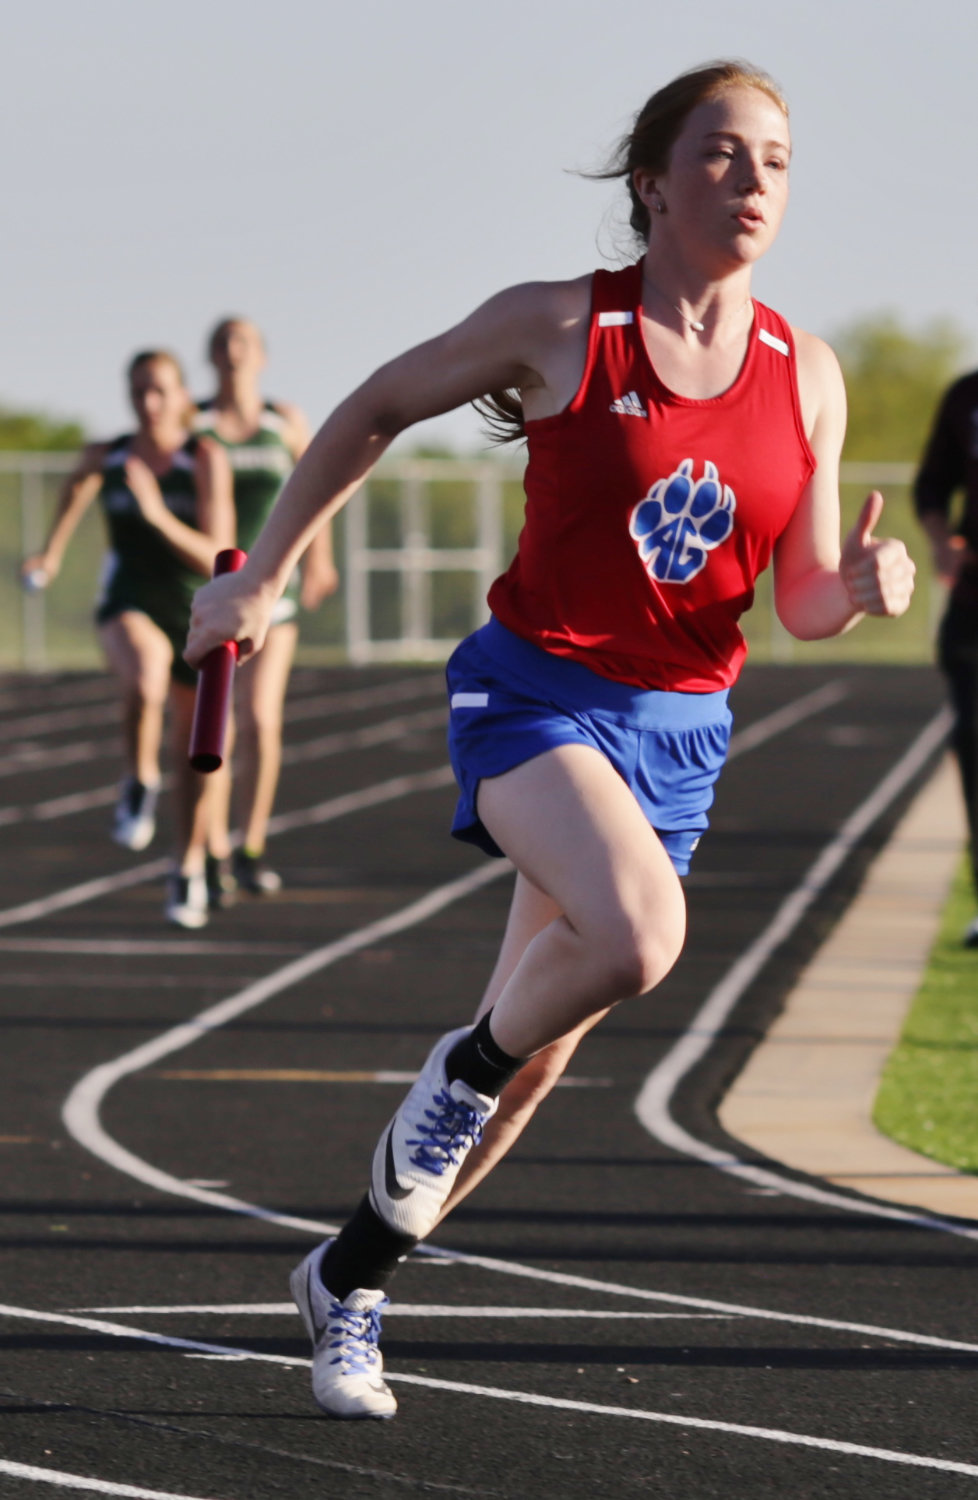 Lady Panther Gracie Teel anchored the gold medal winning 4x200 meter relay team.